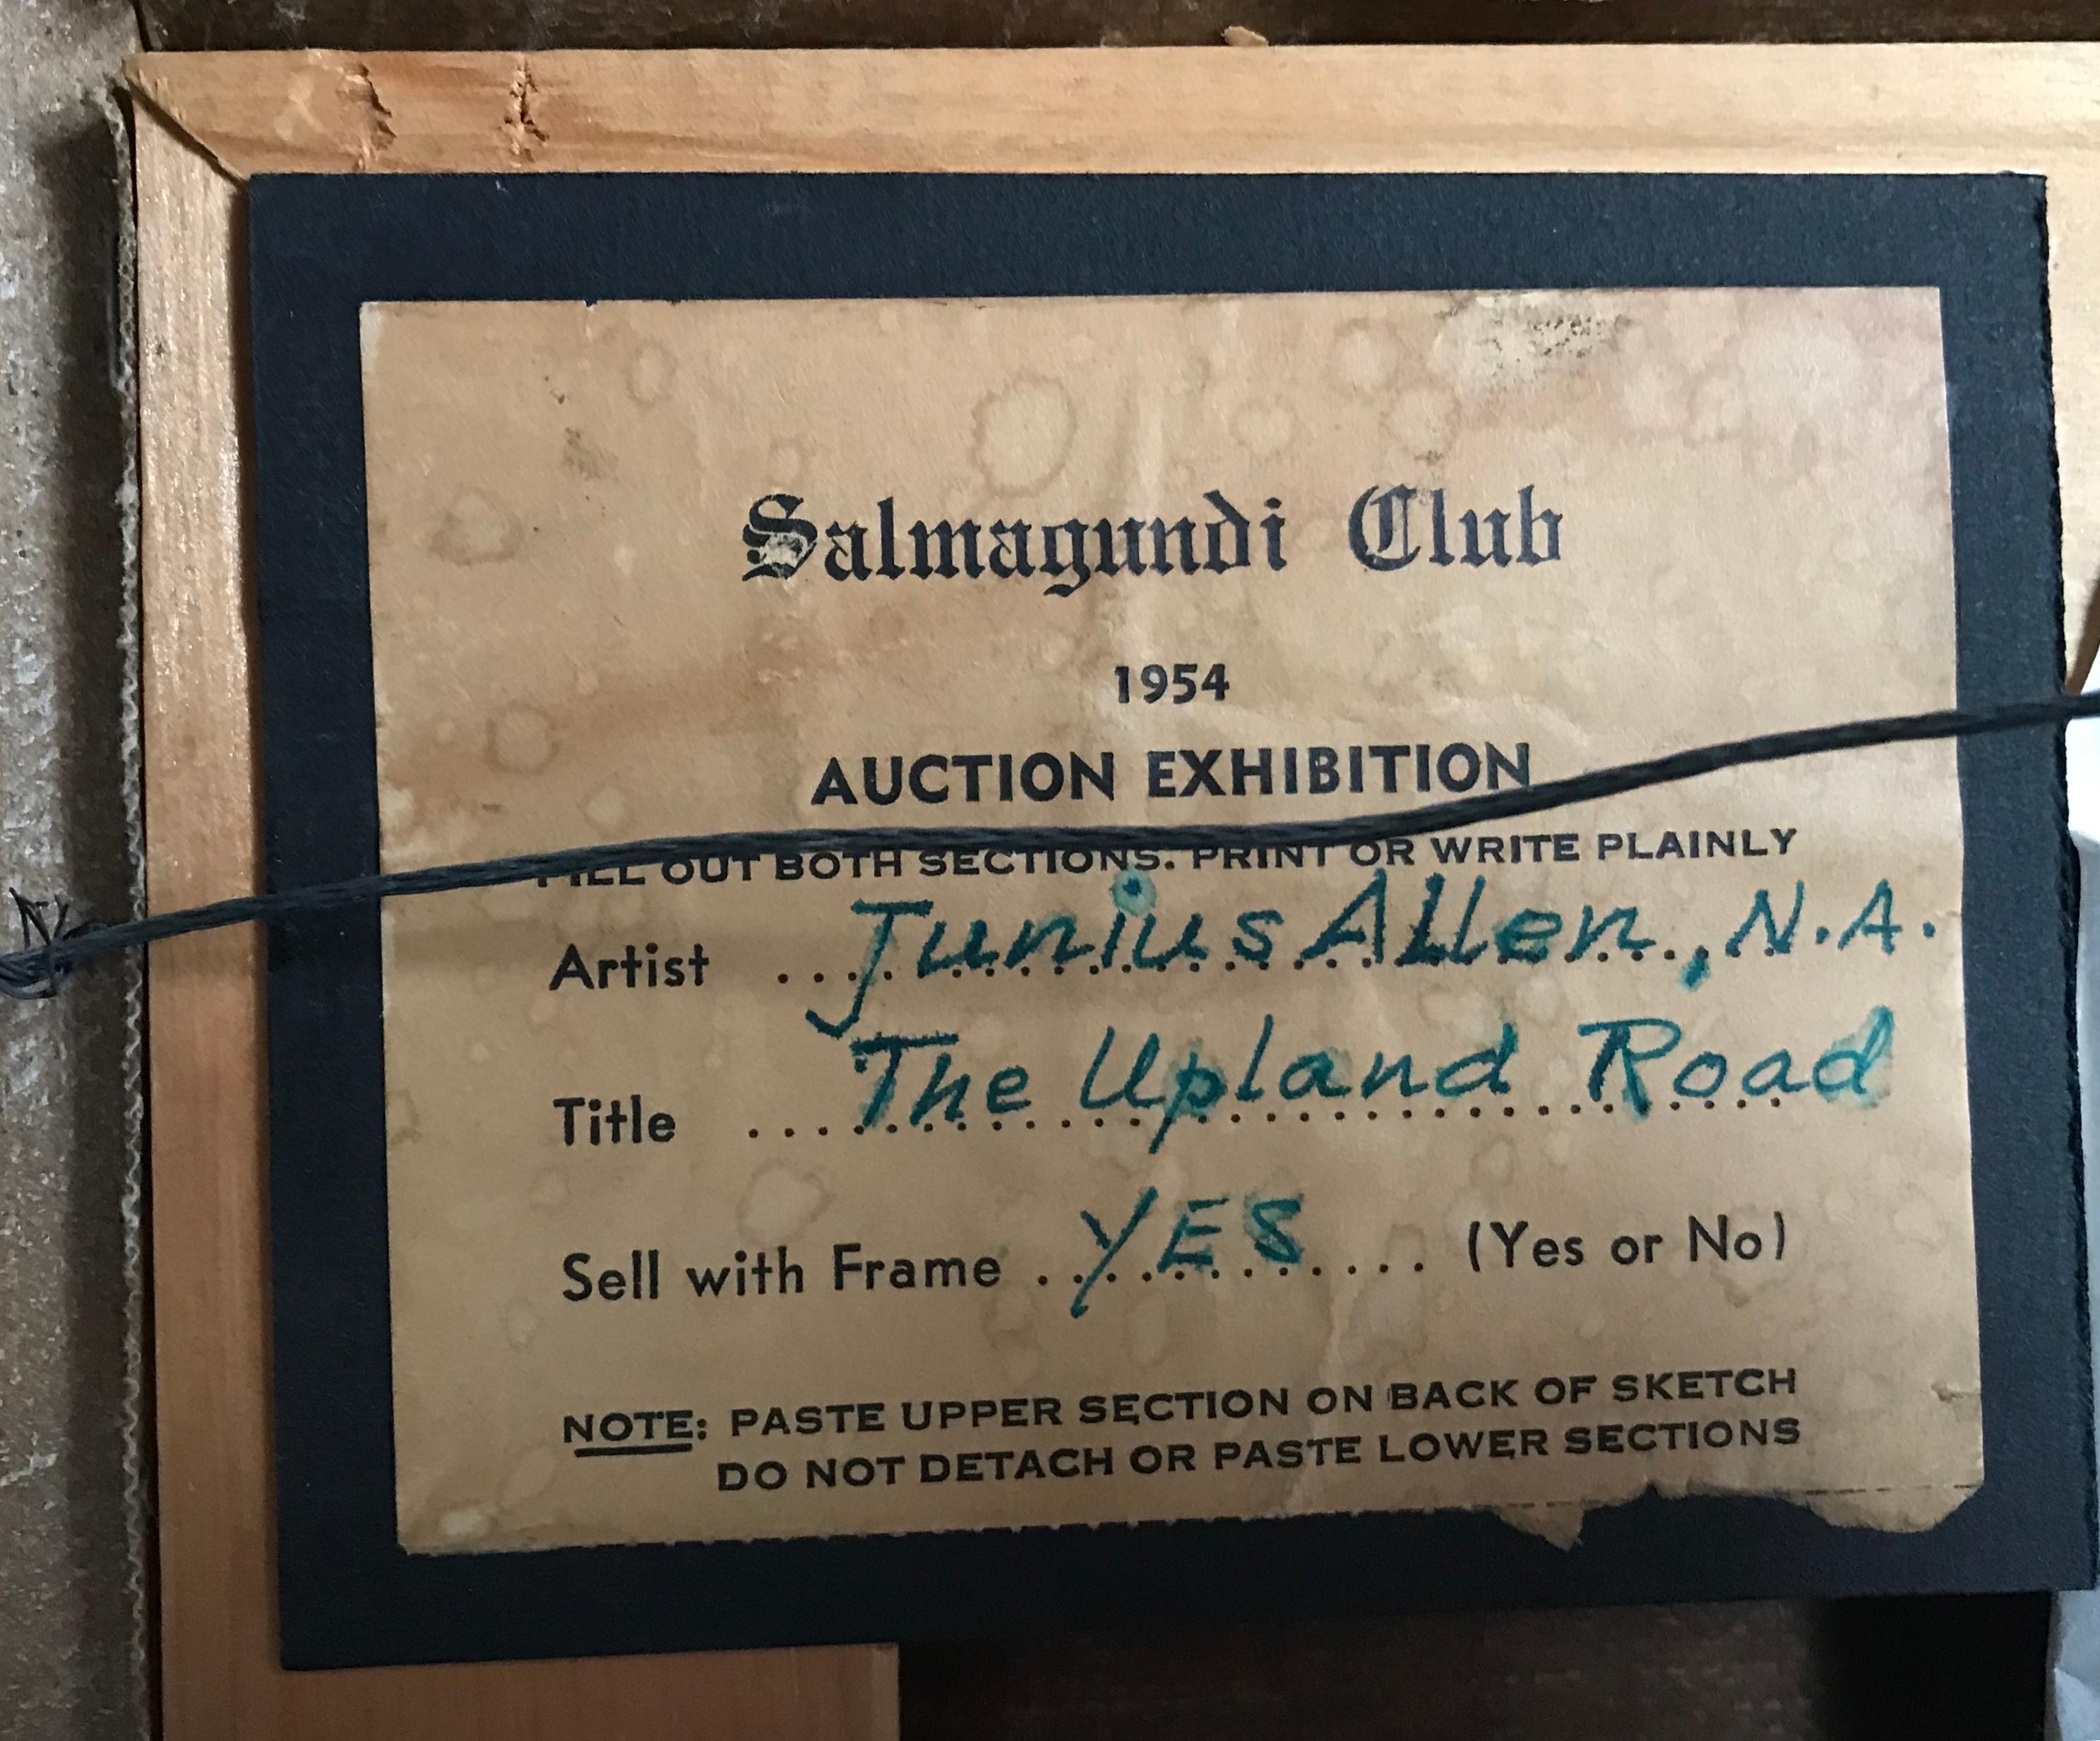 Junius Allen Salmagundi Club oil painting The Upland Road with Club label For Sale 5